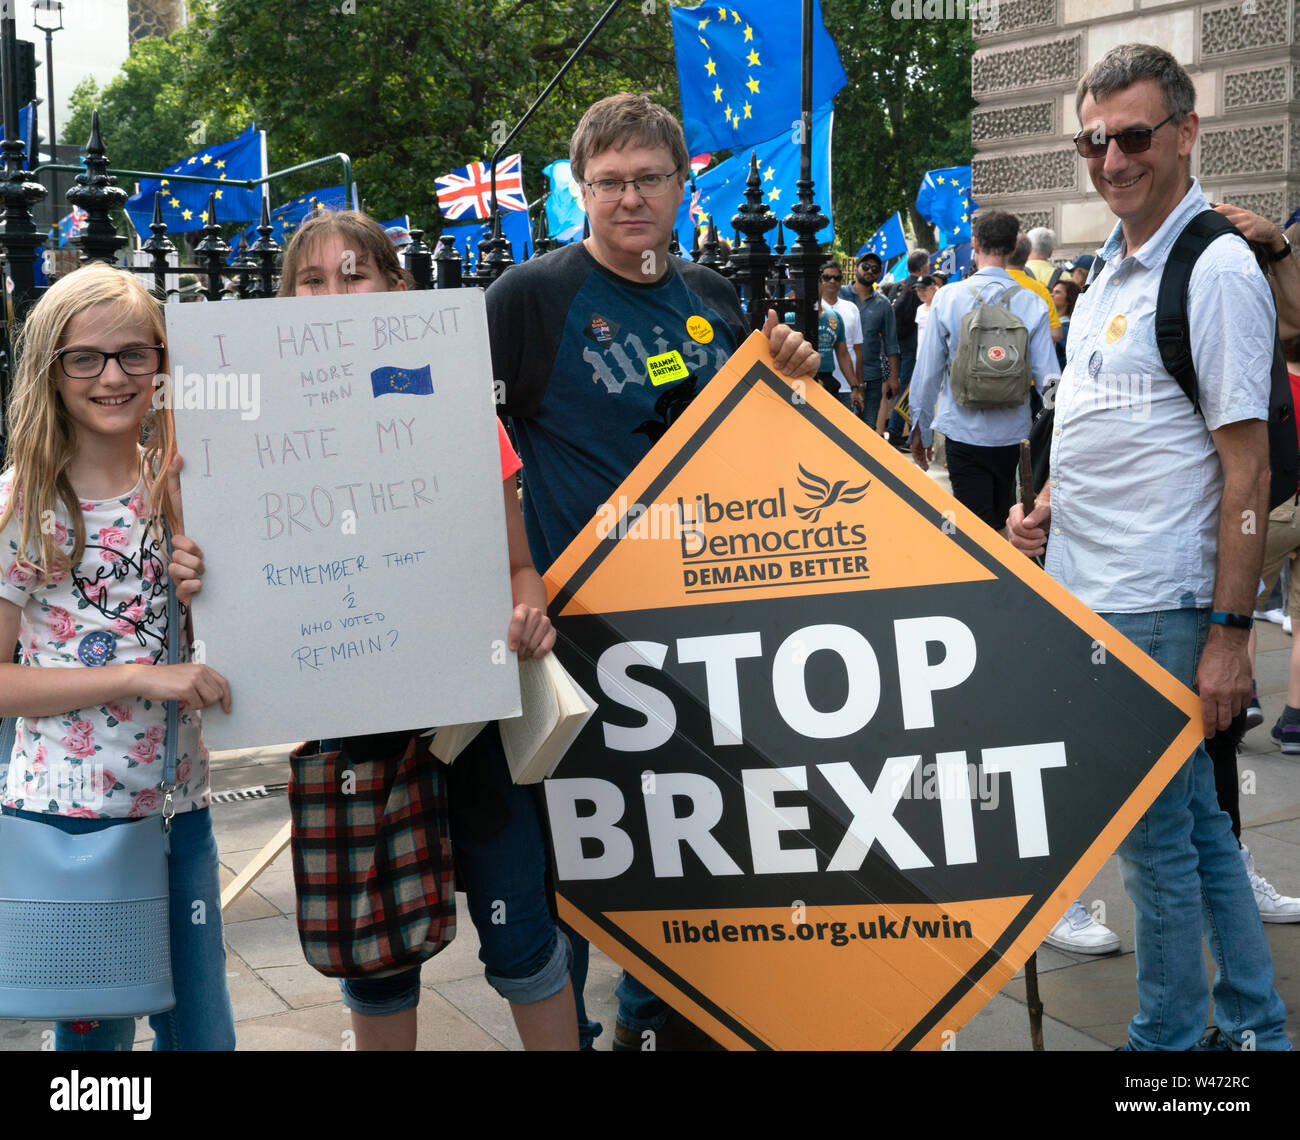 London, UK. July 20th 2019: Anti Brexit protesters gather in Parliament Square following a march through London. It has been estimated that 1 million people attended from all regions in the country Credit: Bridget Catterall/Alamy Live News Credit: Bridget Catterall/Alamy Live News Stock Photo